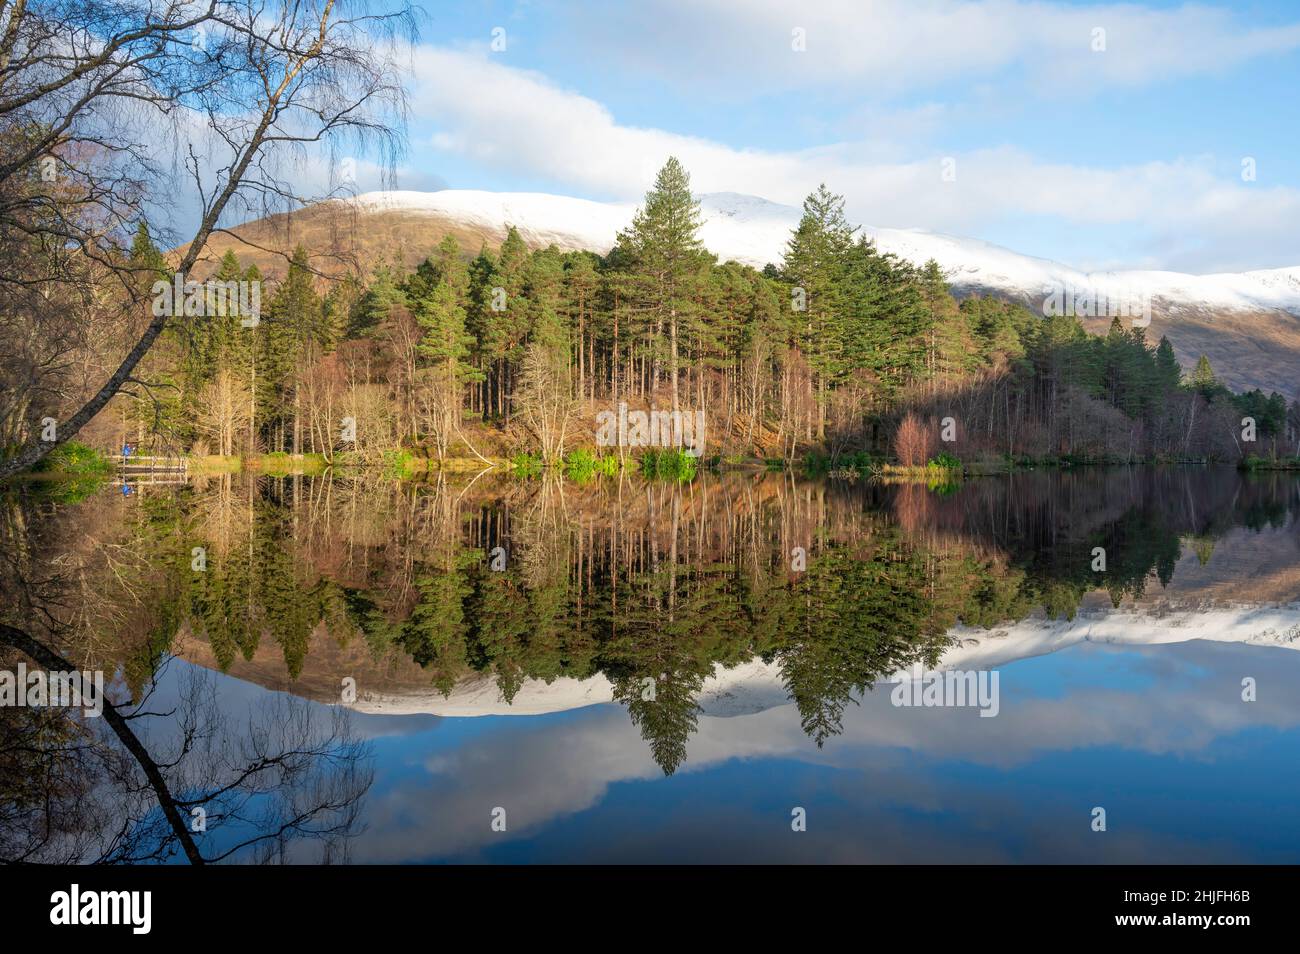 Glencoe lochan in Scottish Highlands in winter. Mirror reflection of trees, blue sky and forest in water. No people. Stock Photo